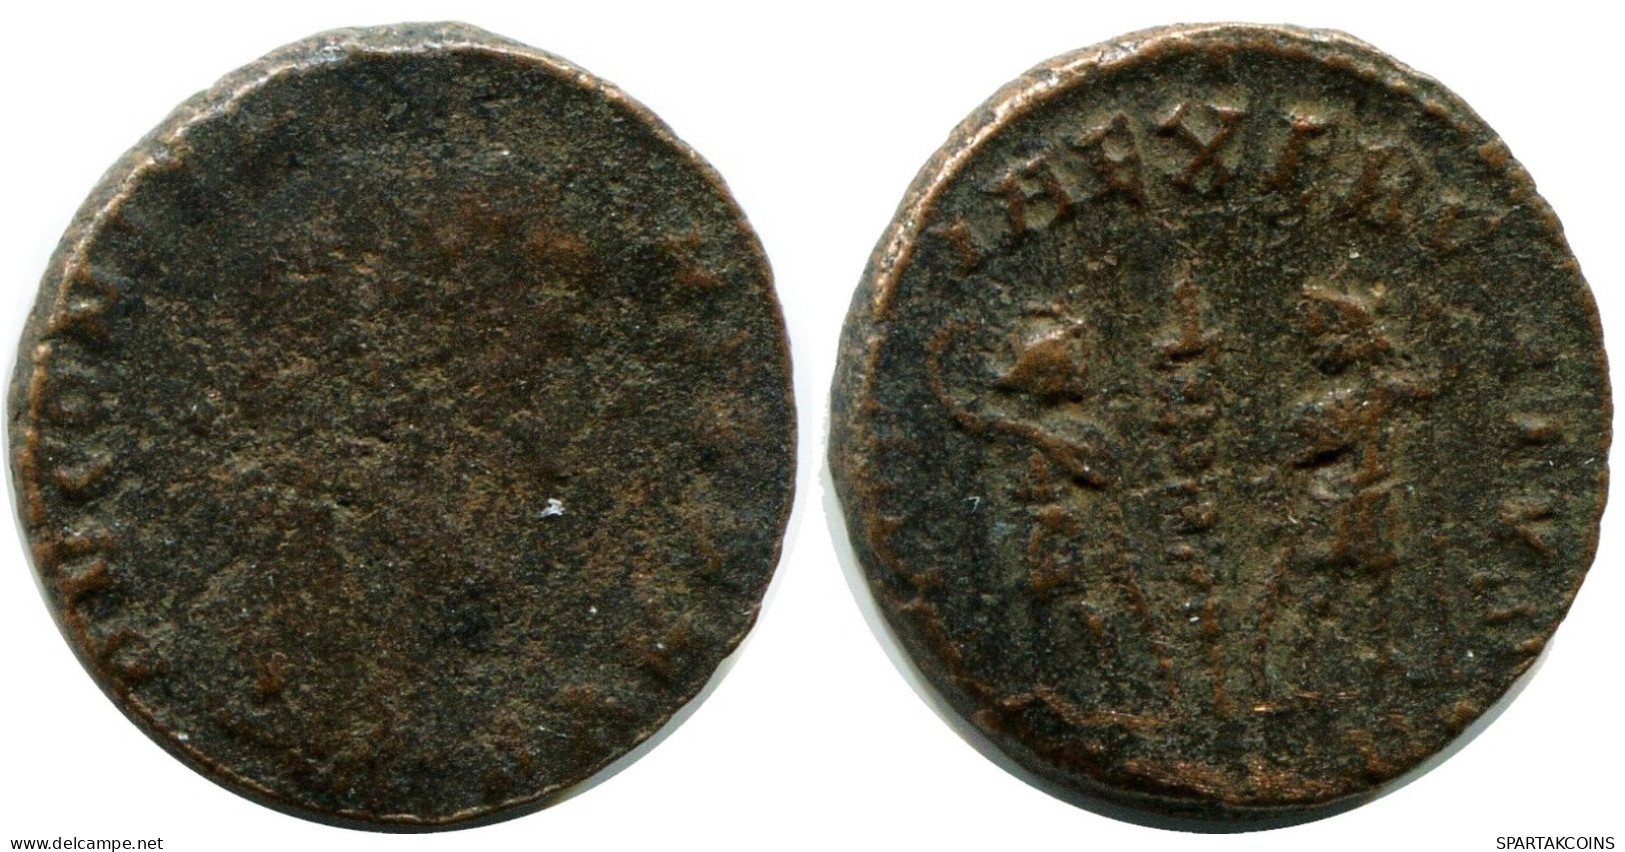 CONSTANS MINTED IN CYZICUS FROM THE ROYAL ONTARIO MUSEUM #ANC11640.14.E.A - L'Empire Chrétien (307 à 363)